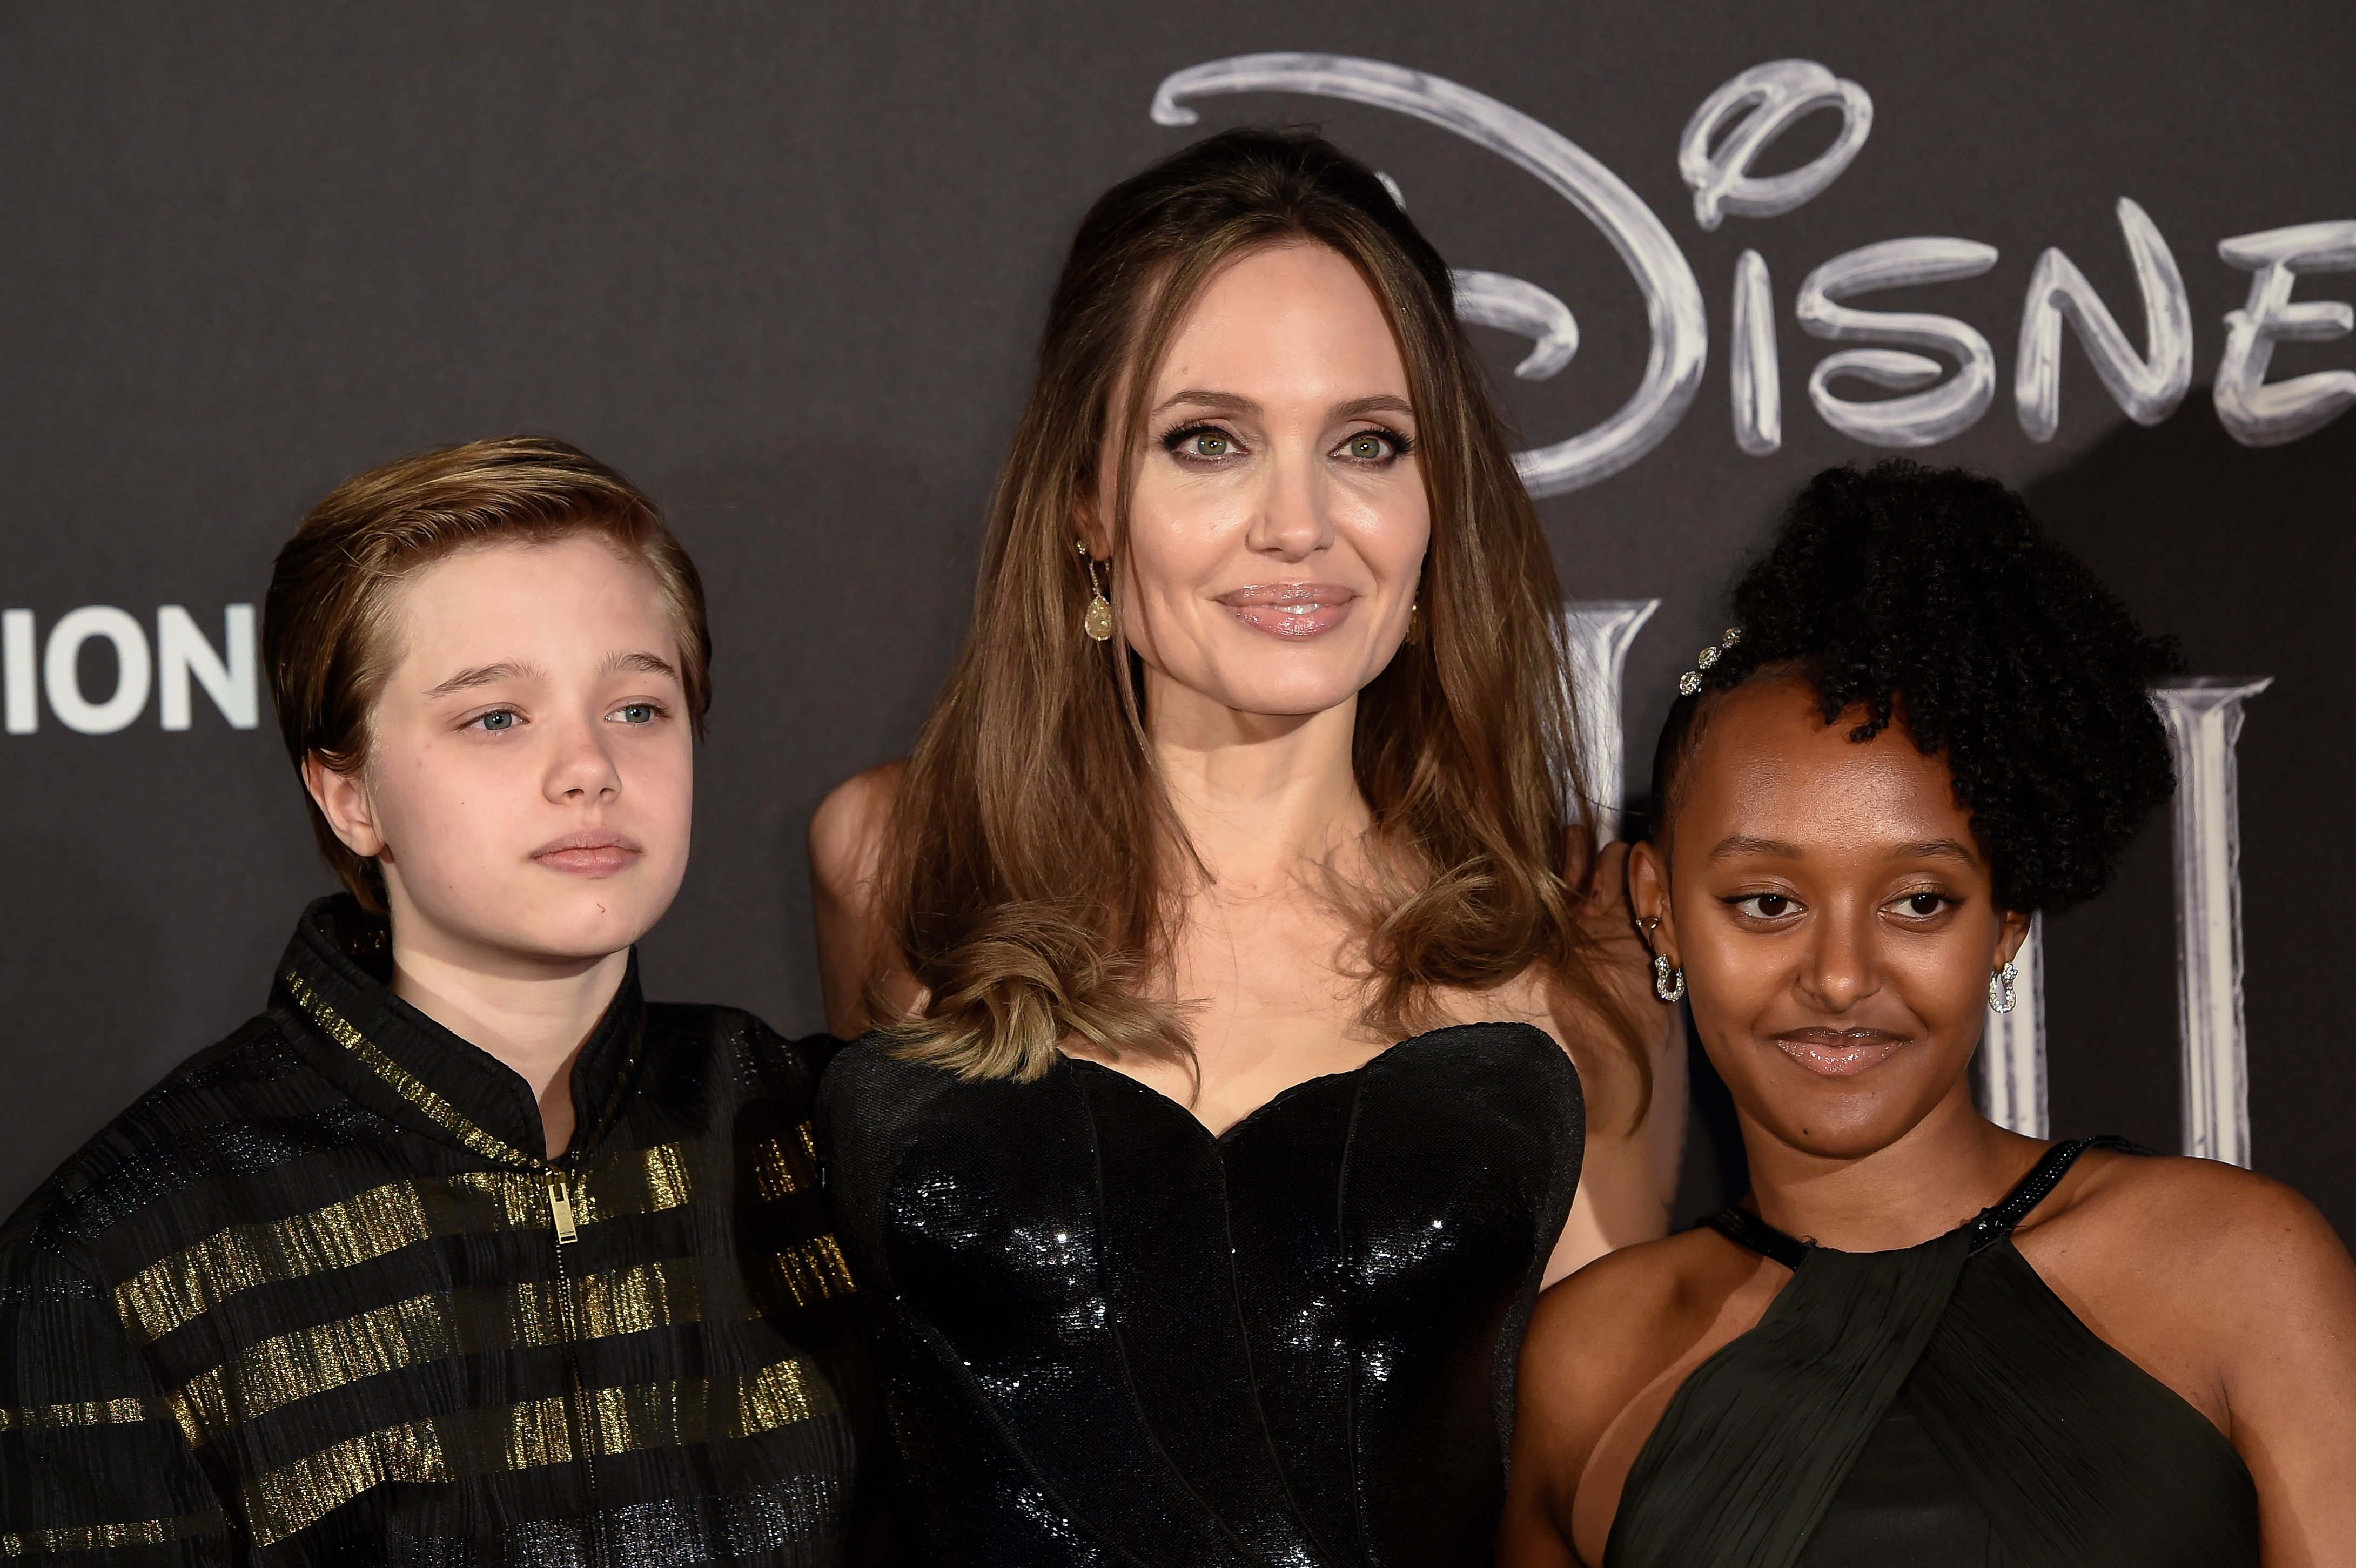 American actress Angelina Jolie and her children Shiloh Nouvel Jolie-Pitt and Zahara Marley Jolie-Pitt during the European premiere of the Disney film Maleficent Lady of Evil at the Auditorium della Conciliazione. Rome, October 7th, 2019